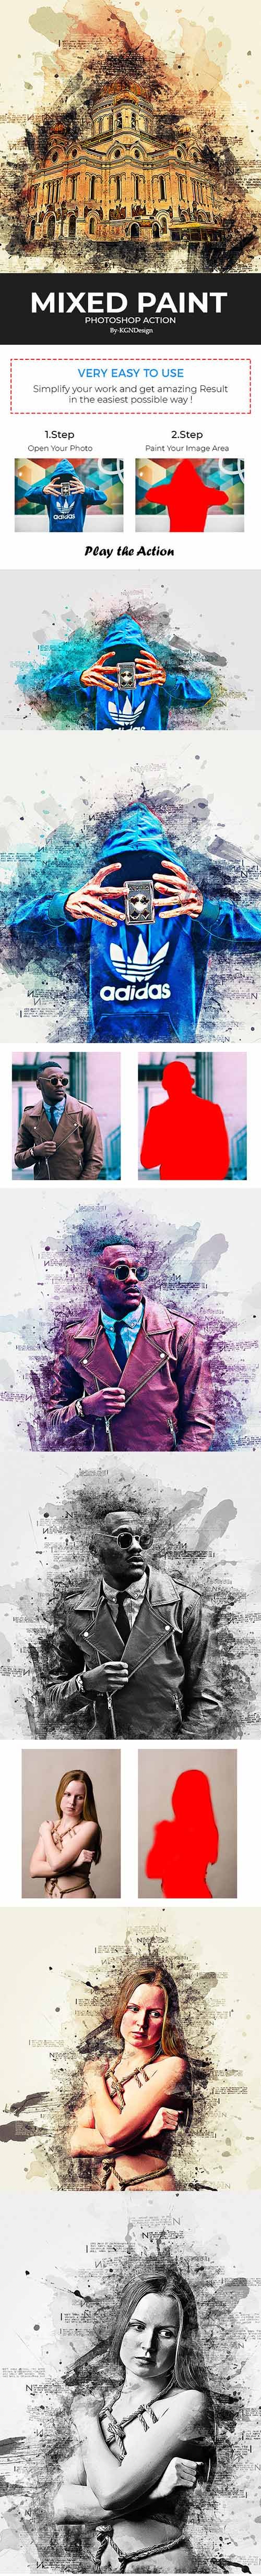 GraphicRiver - Mixed Paint Photoshop Action - 22335350